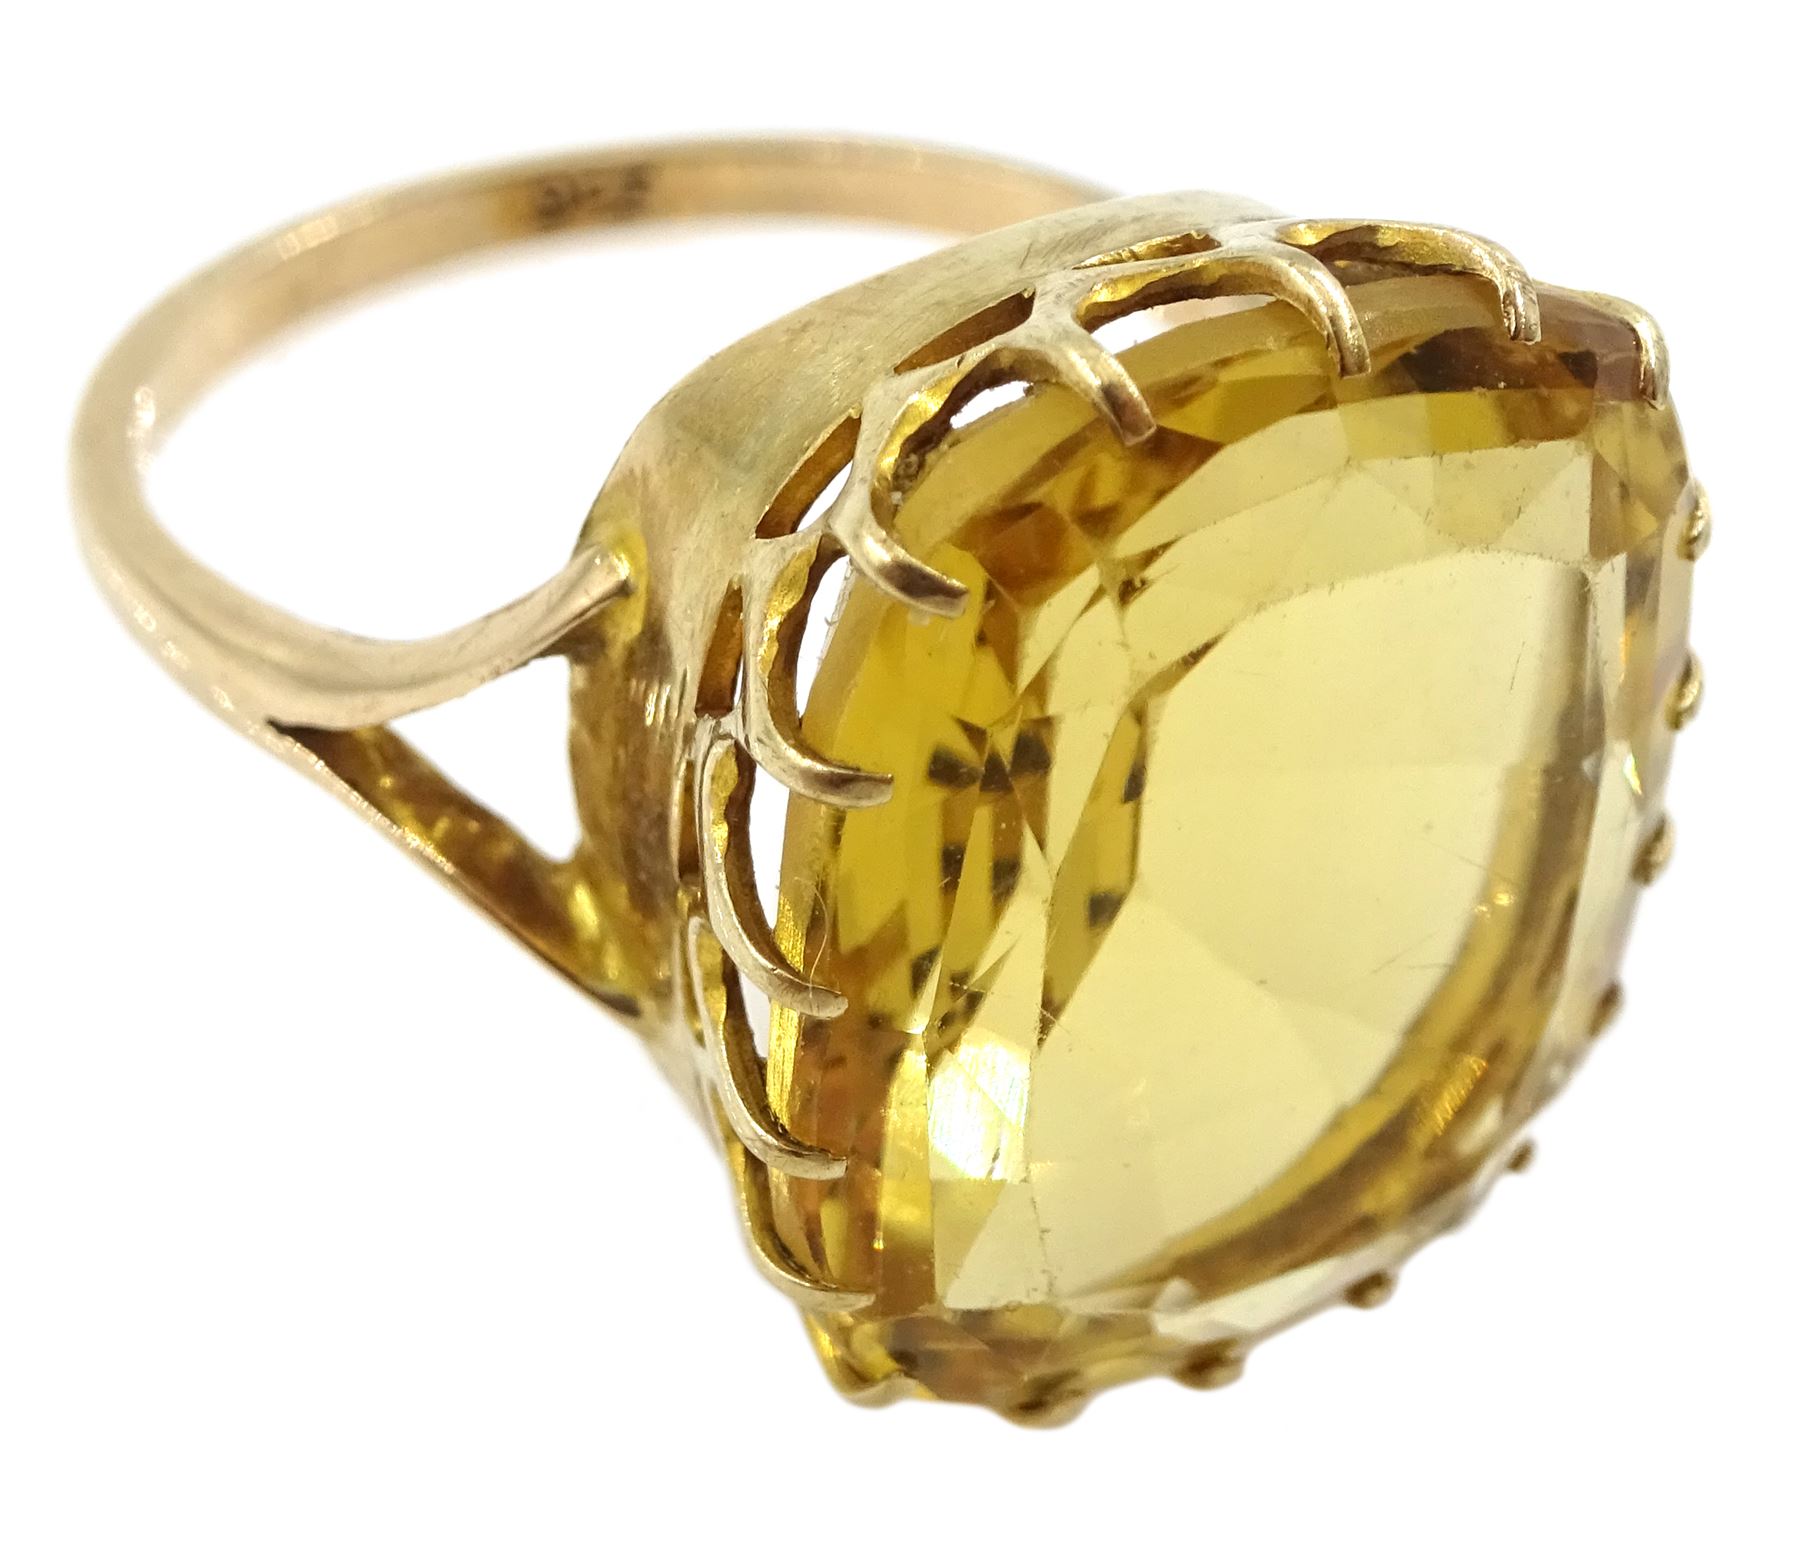 Early-mid 20th century rose gold single stone citrine ring - Image 3 of 4